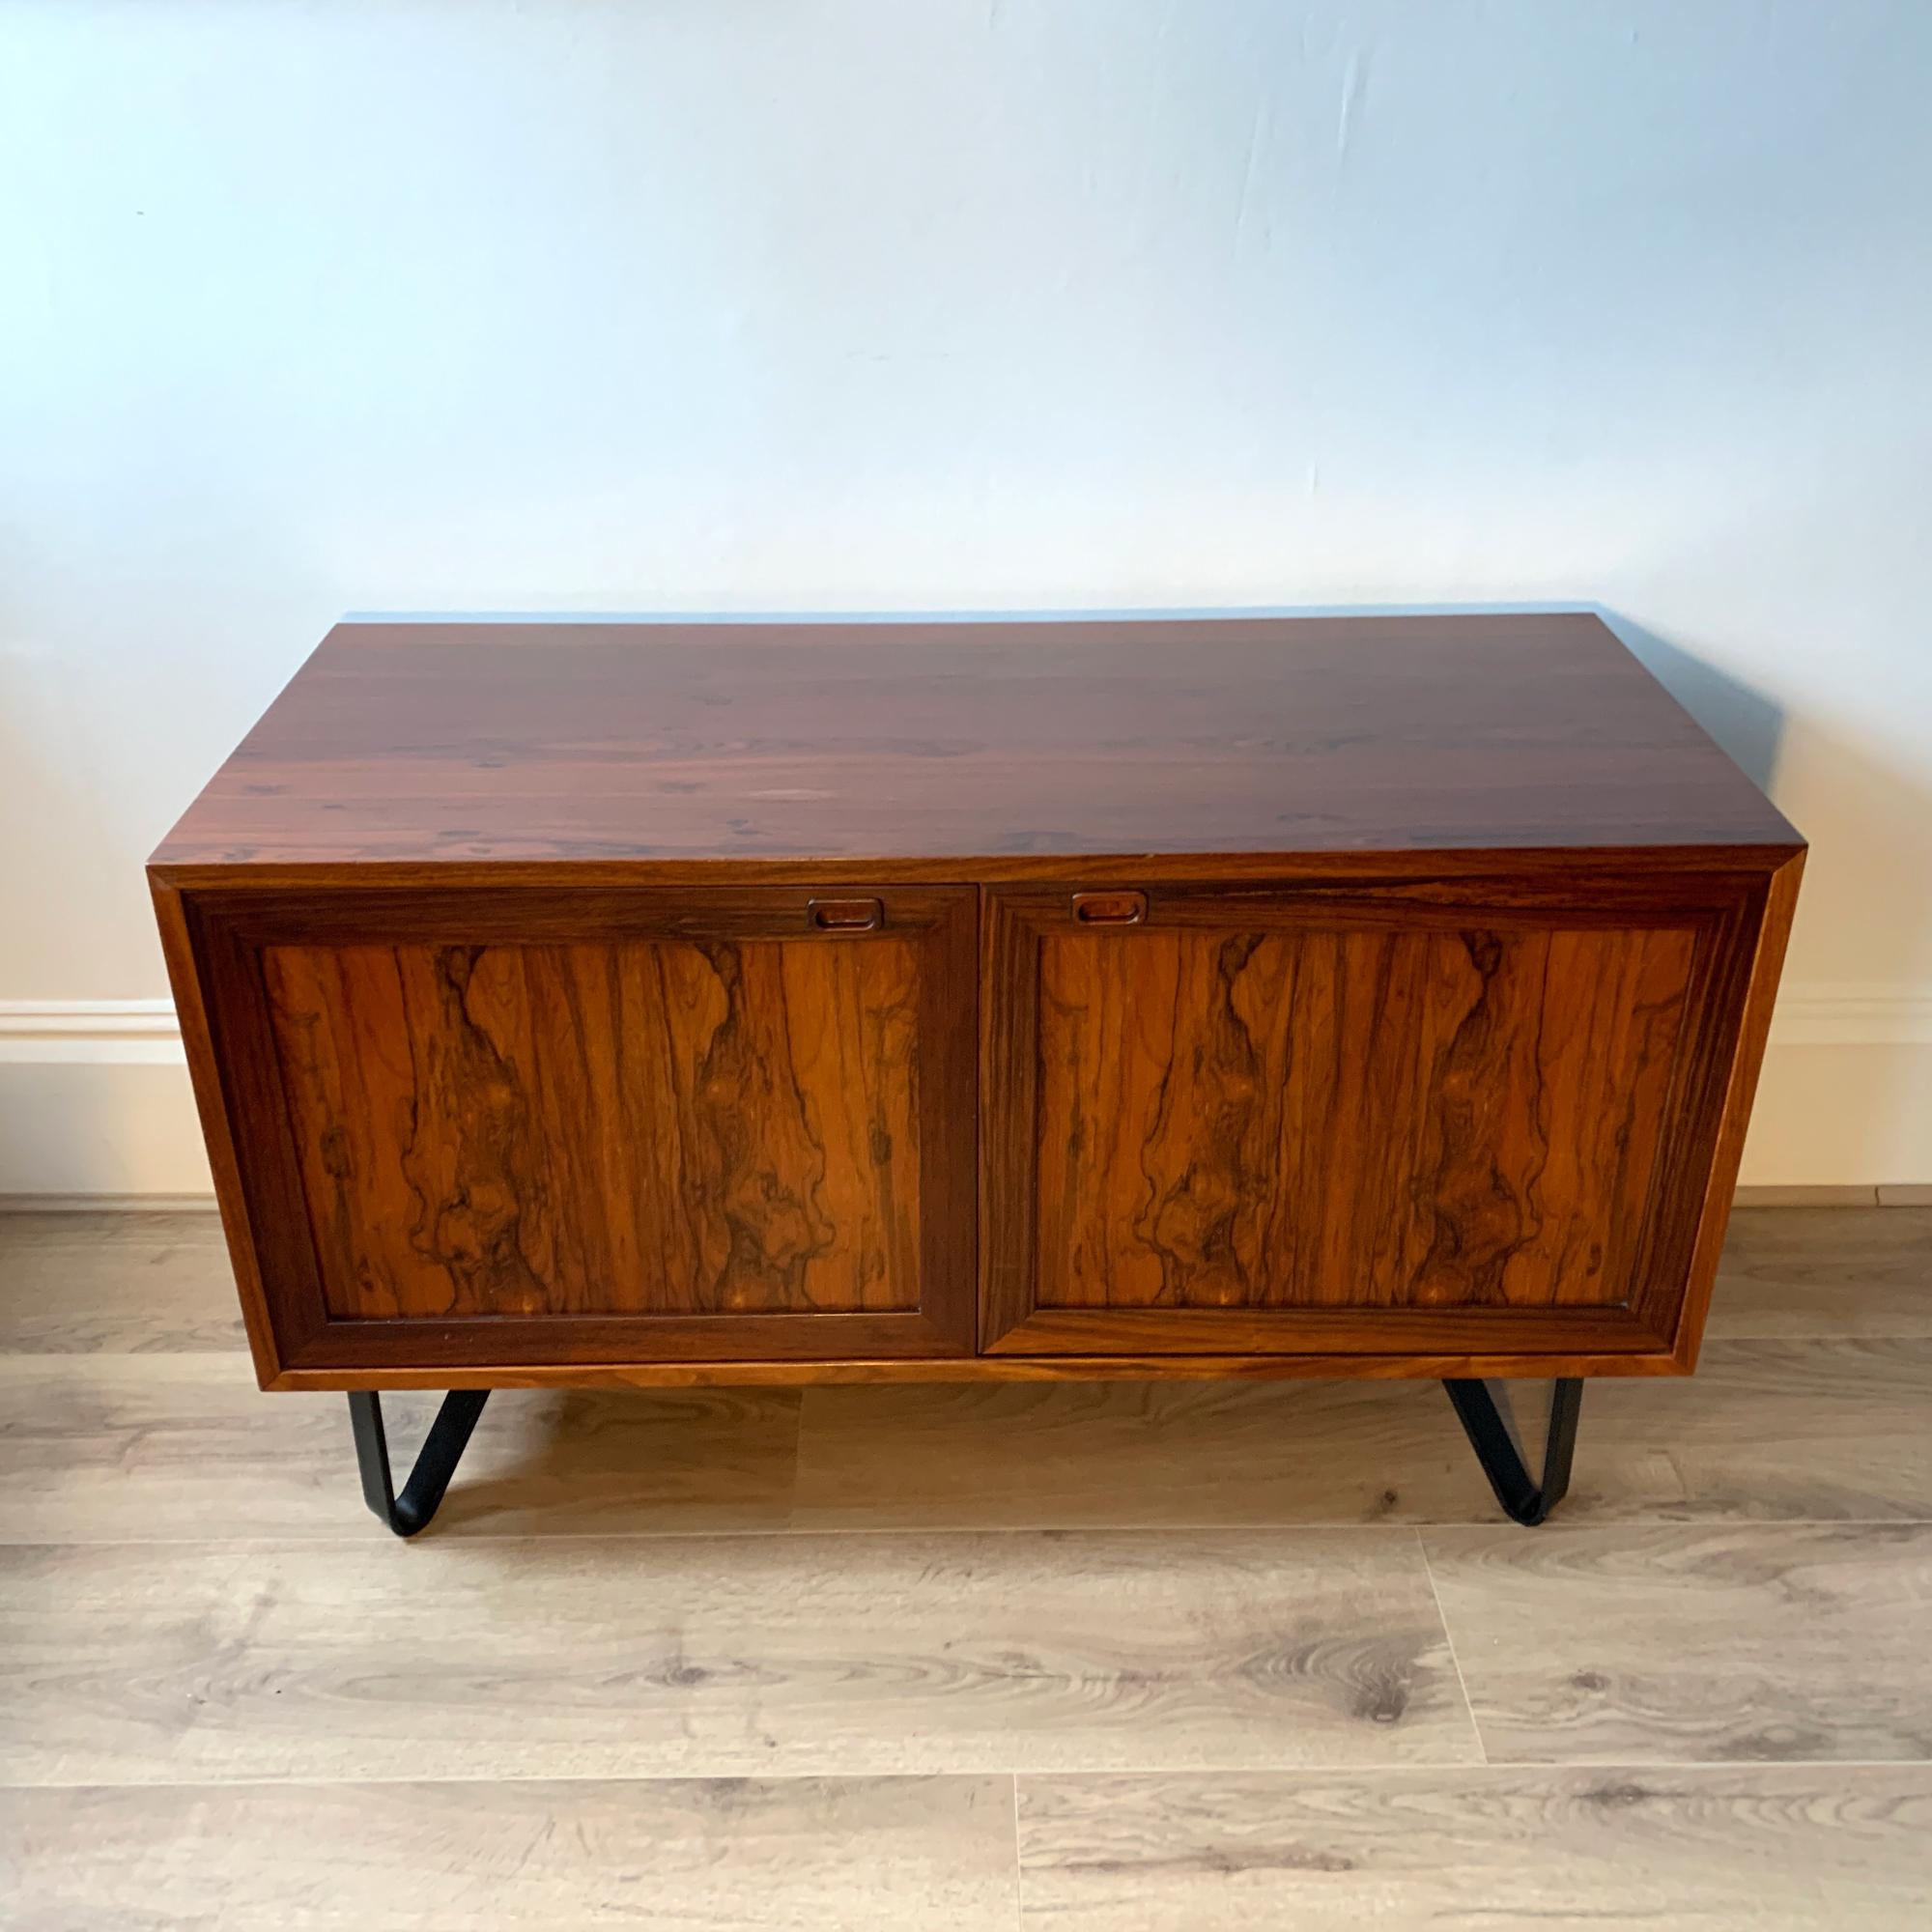 High-quality Danish Rosewood Sideboard from the 1970s and manufactured by Sejling Skabe. Featuring two cupboard doors with recessed door pulls, and internal shelving.

The unit sits on hairpin legs. Dimensions: W:110 x D:48 x H:66 cm

Condition: